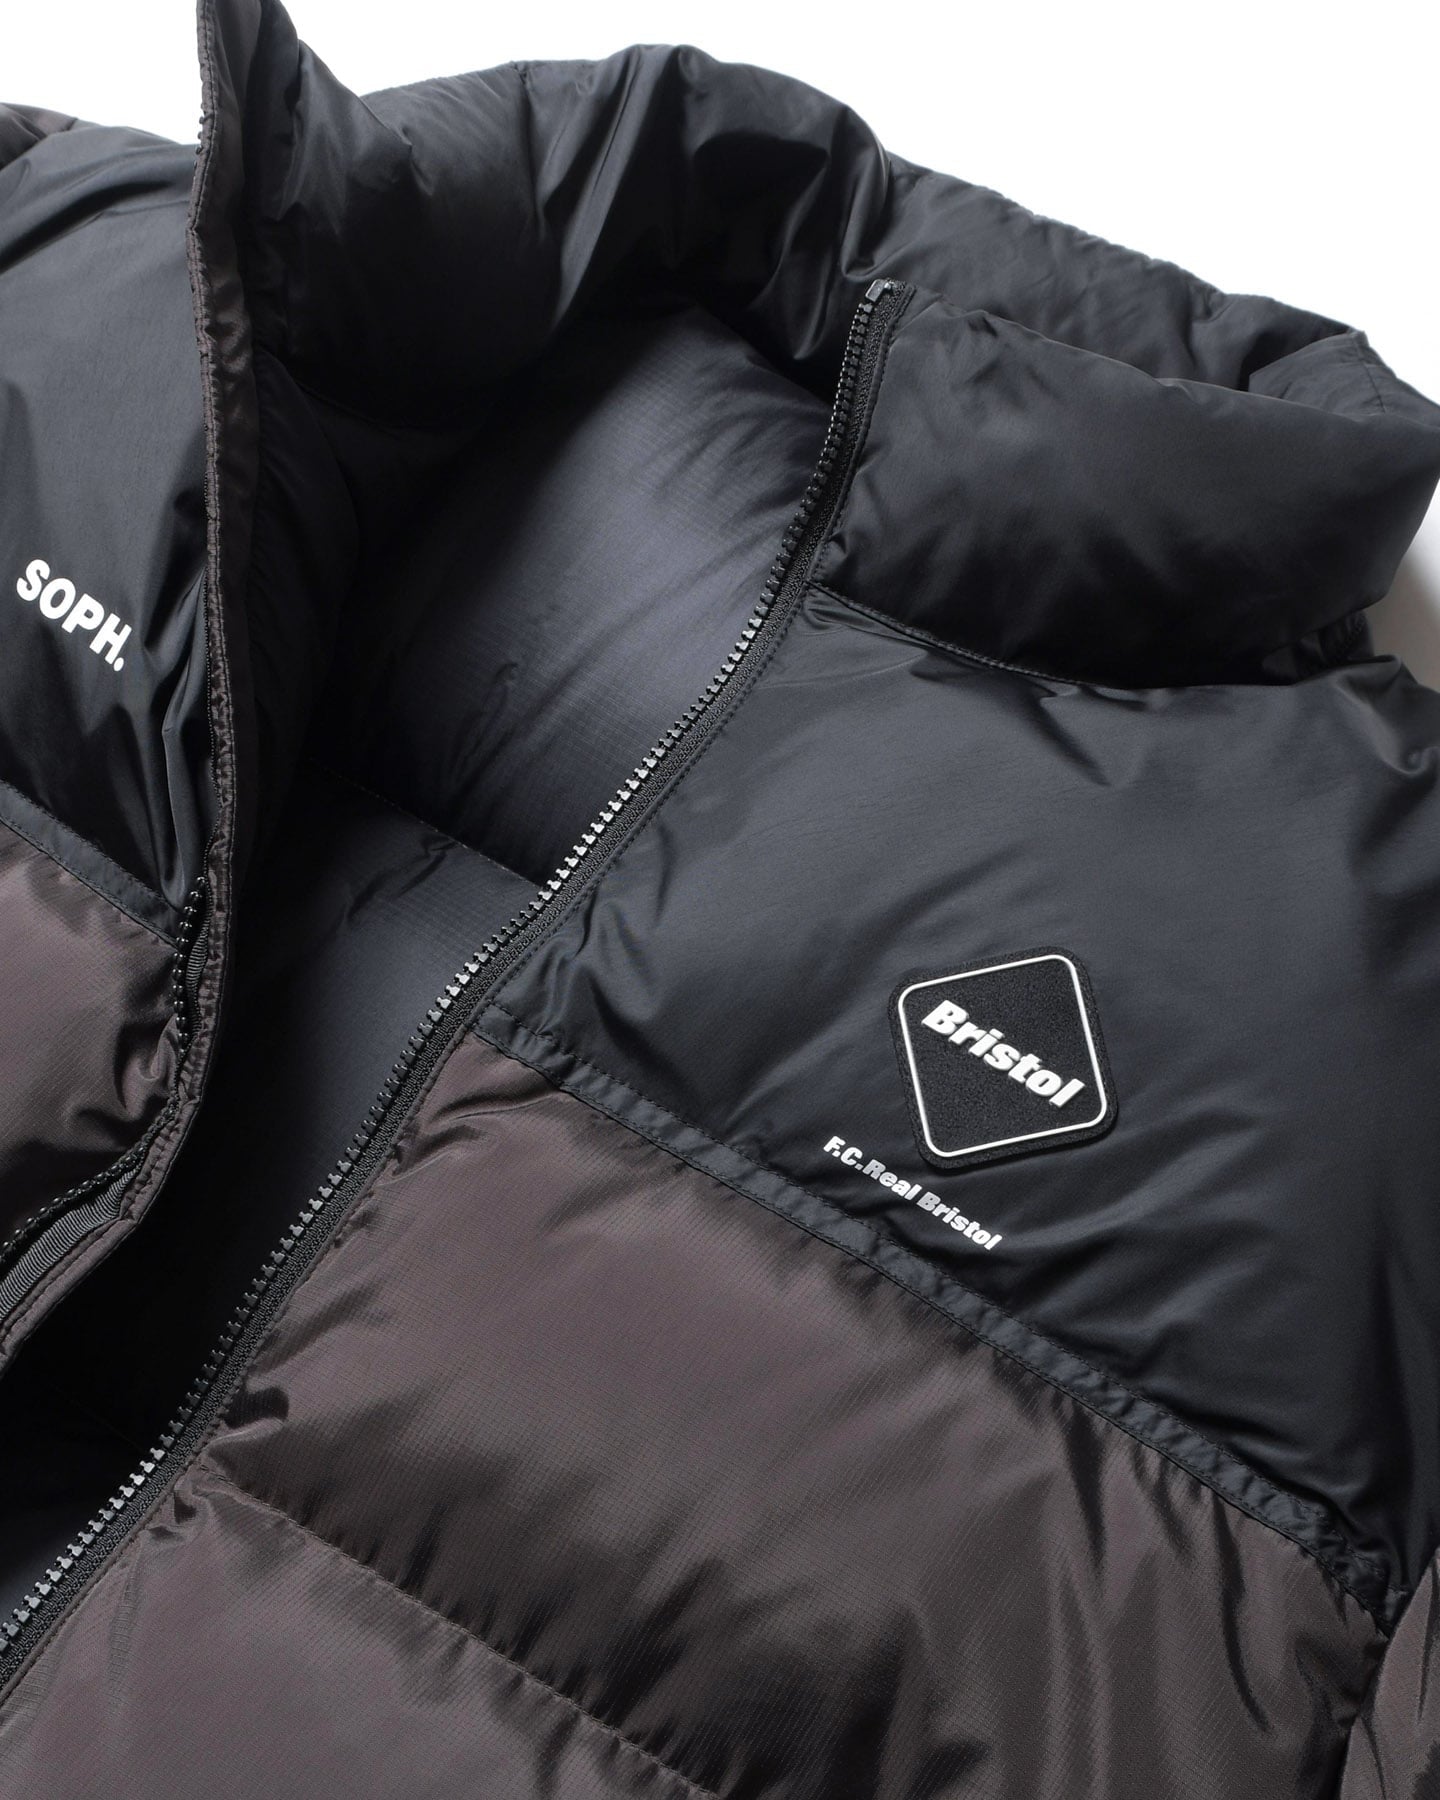 STAND COLLAR DOWN JACKET